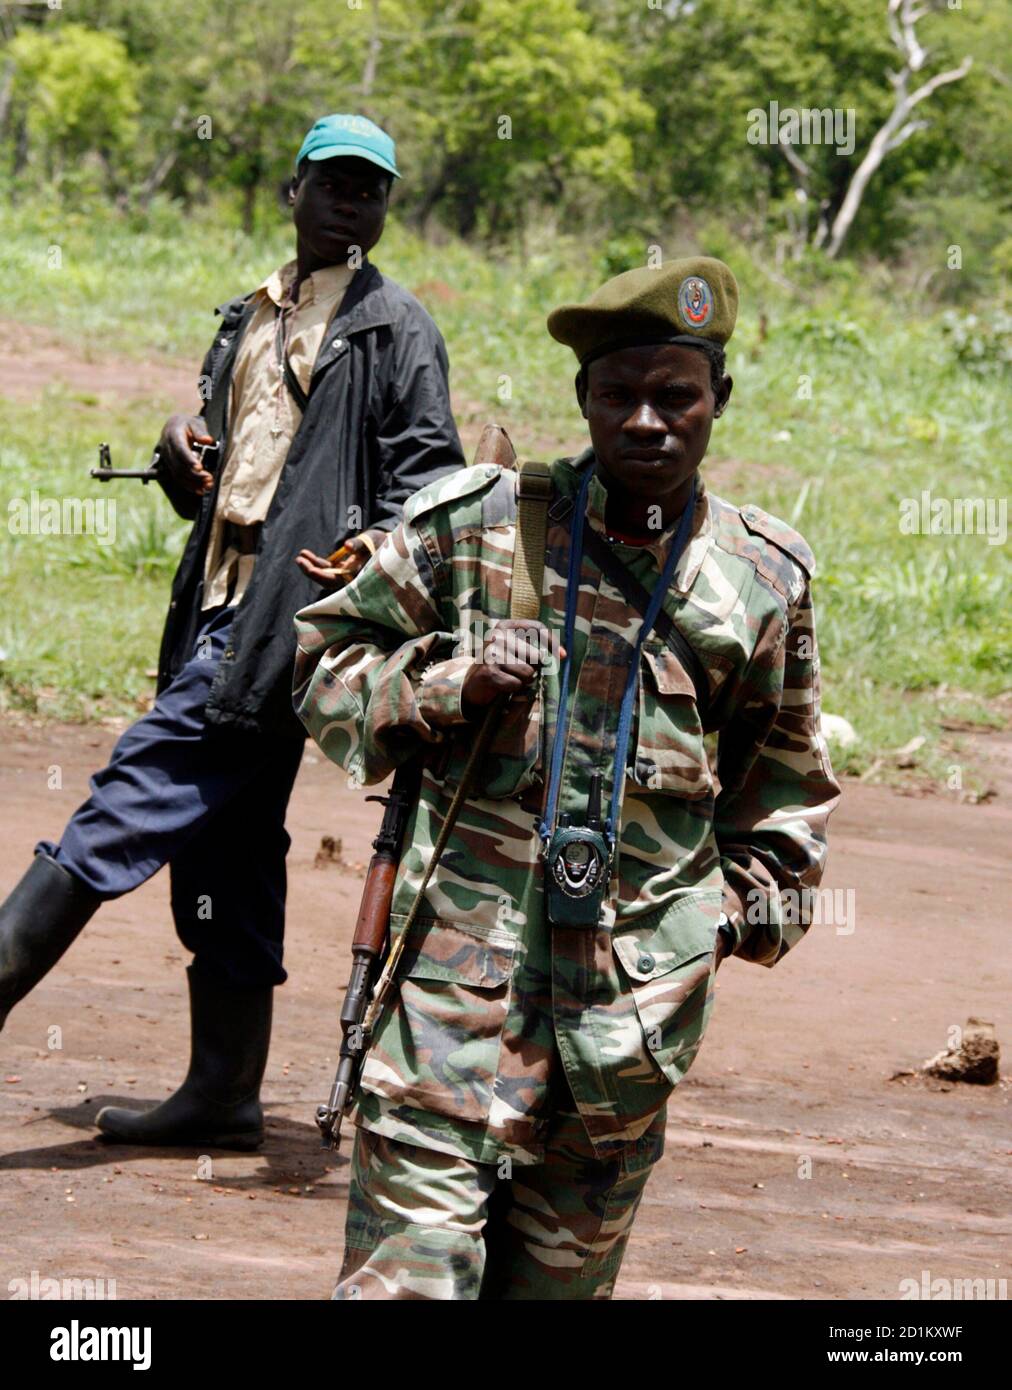 Soldiers from Uganda's Lord's Resistance Army (LRA) keep guard at the assembly point in Ri-Kwangba on the Sudan-Congo border, Western Equatoria, April 10, 2008. Uganda's fugitive rebel commander Joseph Kony delayed signing a final peace deal with the government on Thursday and asked for clarification of some parts of the agreement, mediators said.  REUTERS/Thomas Mukoya (SUDAN) Stock Photo